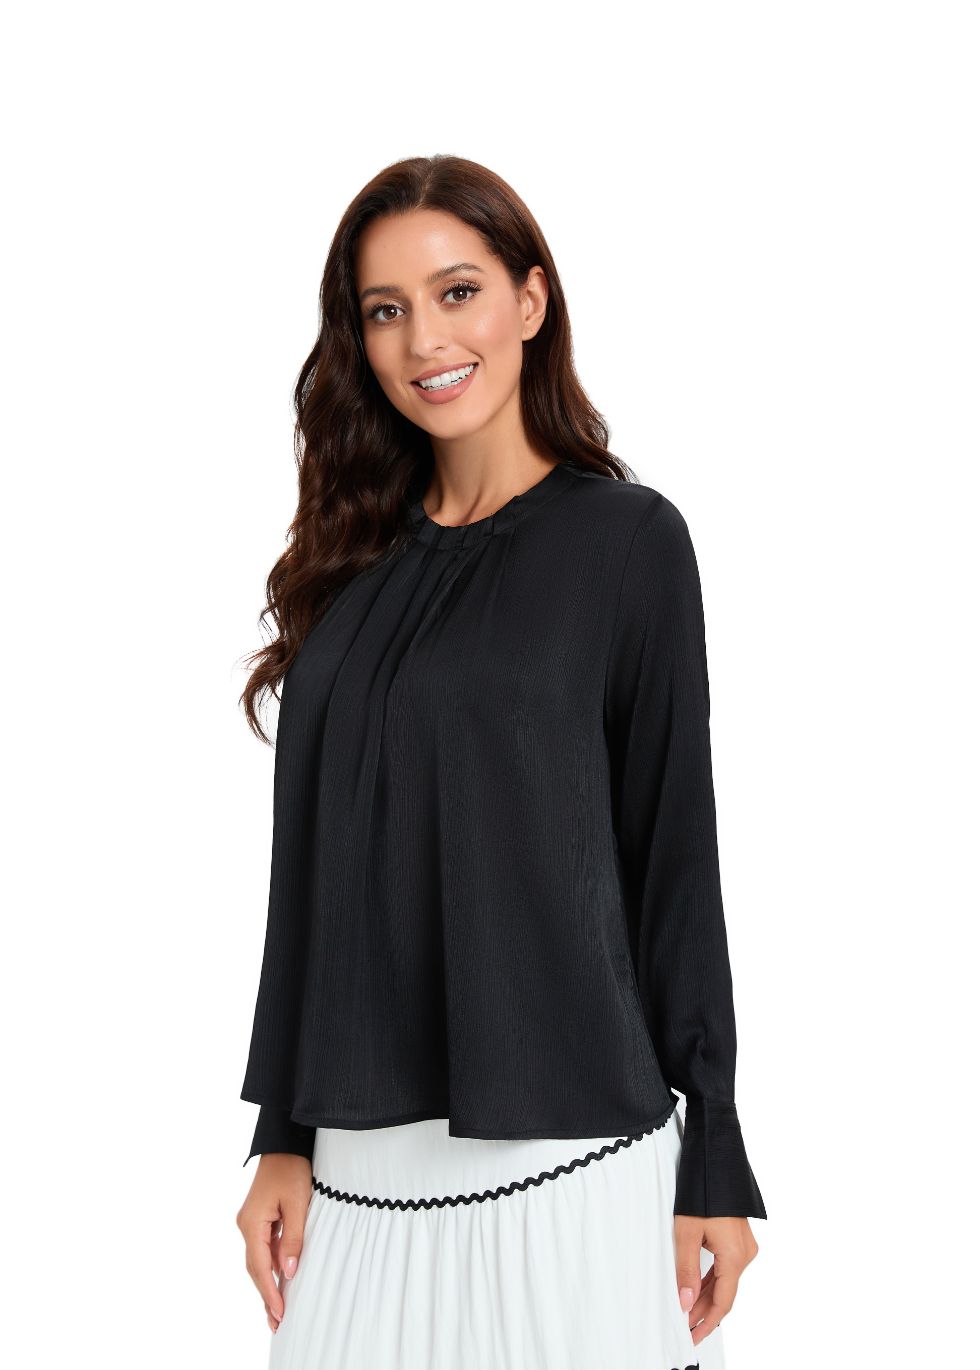 Chic Sophistication Black Top